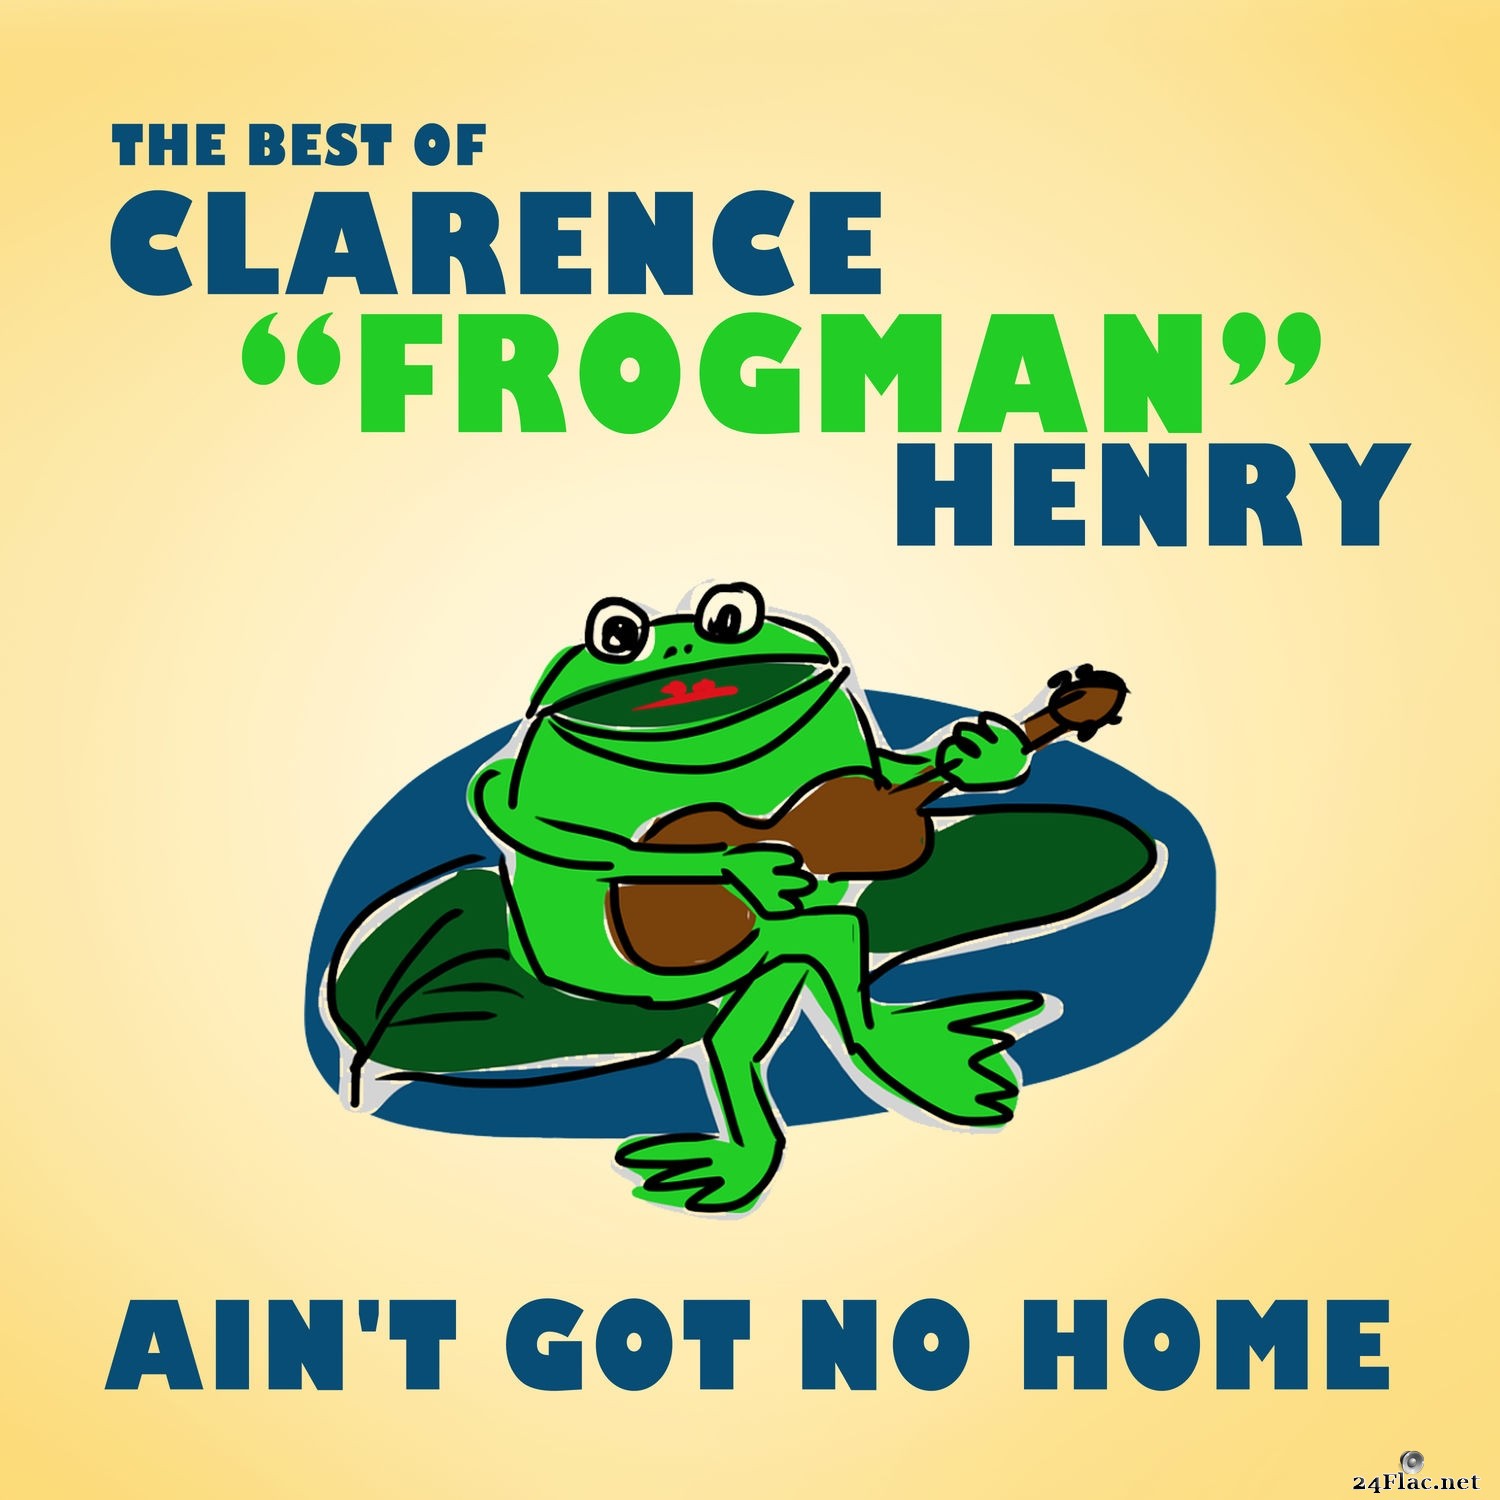 Clarence “Frogman” Henry - Ain&#039;t Got No Home: The Best of Clarence &quot;Frogman&quot; Henry (Reissue) (2018) Hi-Res